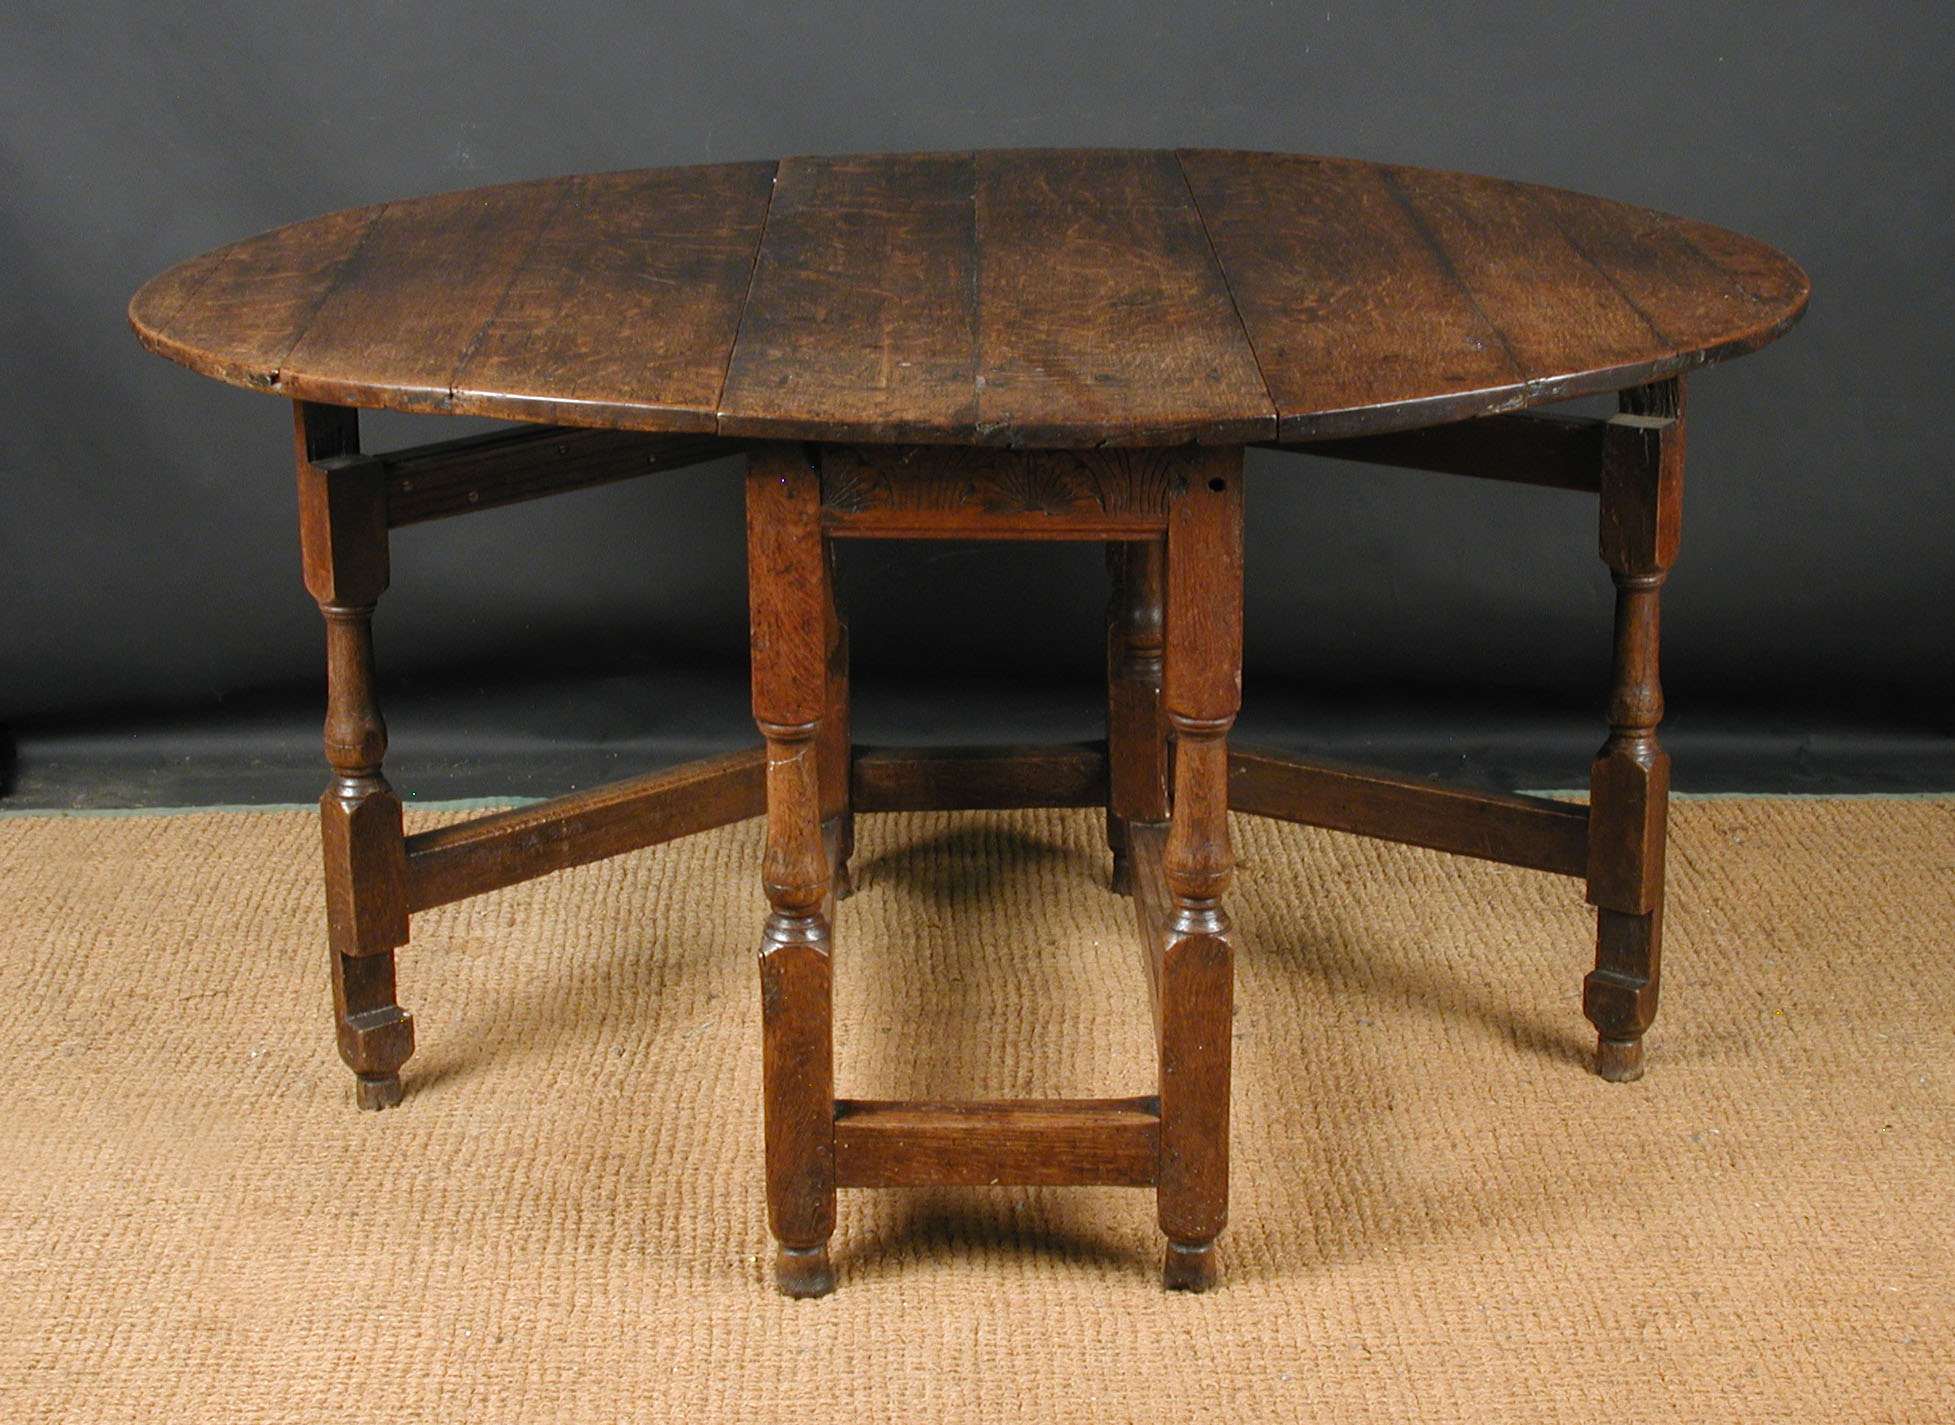 A 17th Century and later oak gateleg table - 136cm oval open A 17th Century and later oak gateleg